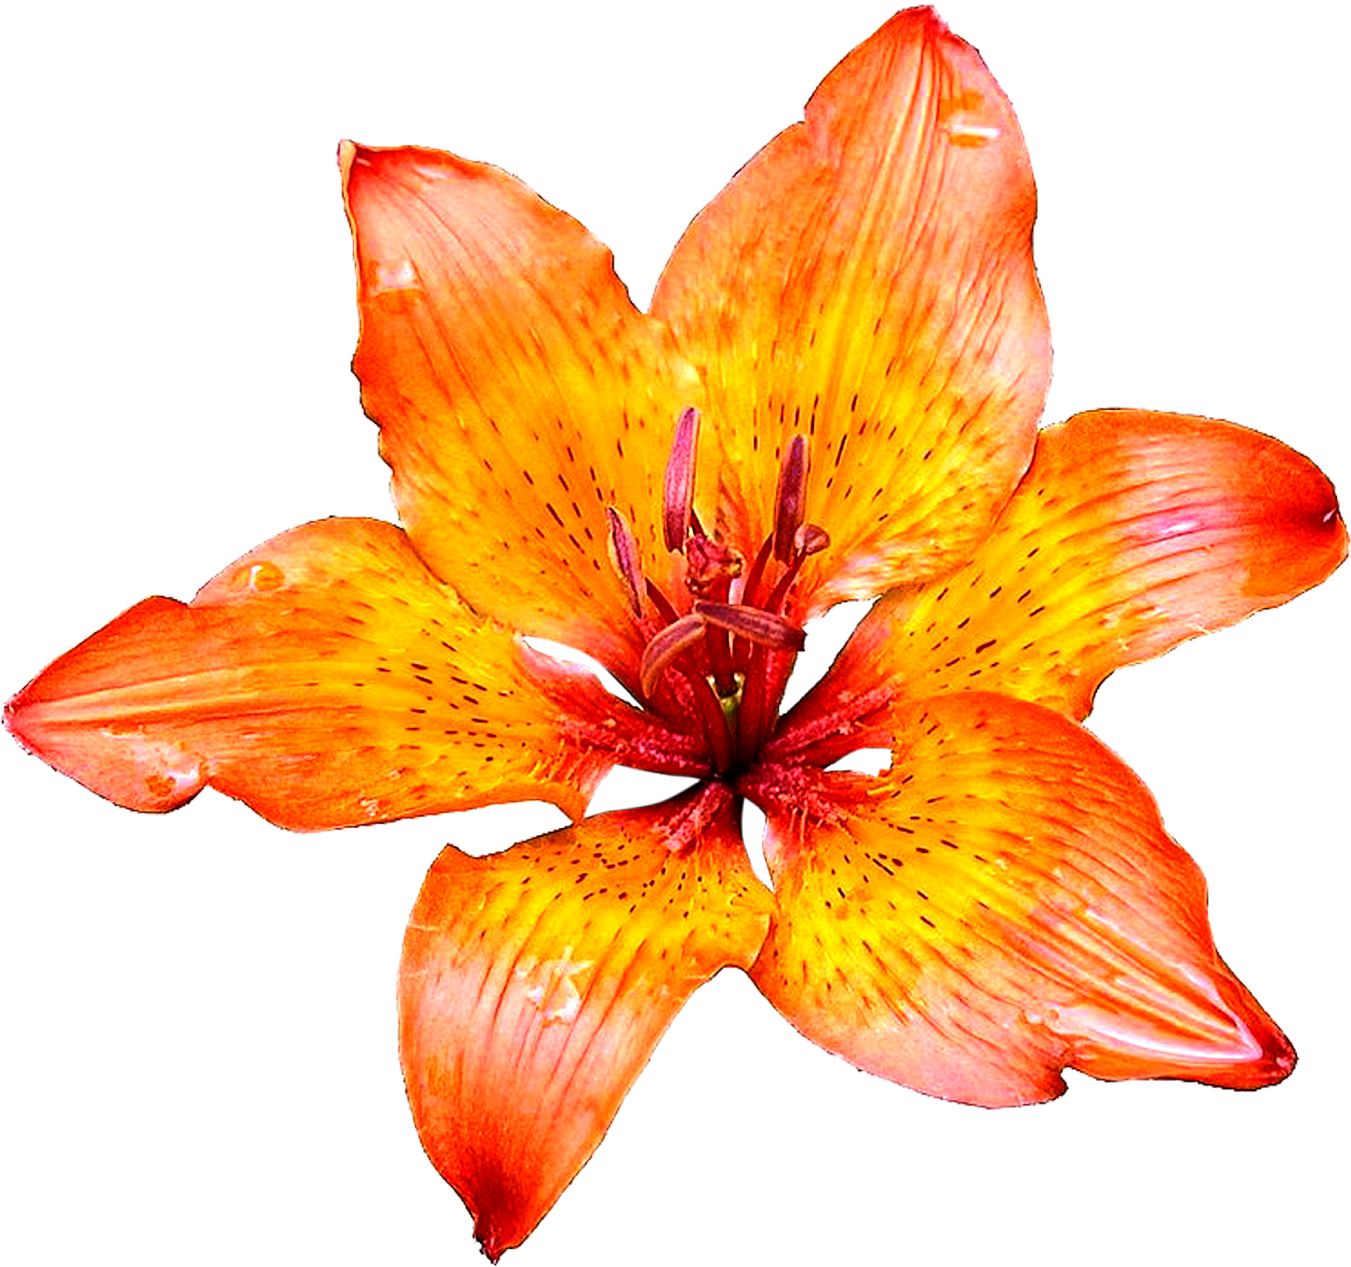 Lily Flowers Png Images Pics Free Download - Orange Color Shades Wildflowers Approximate 100 Seedseasy (1600x1600)